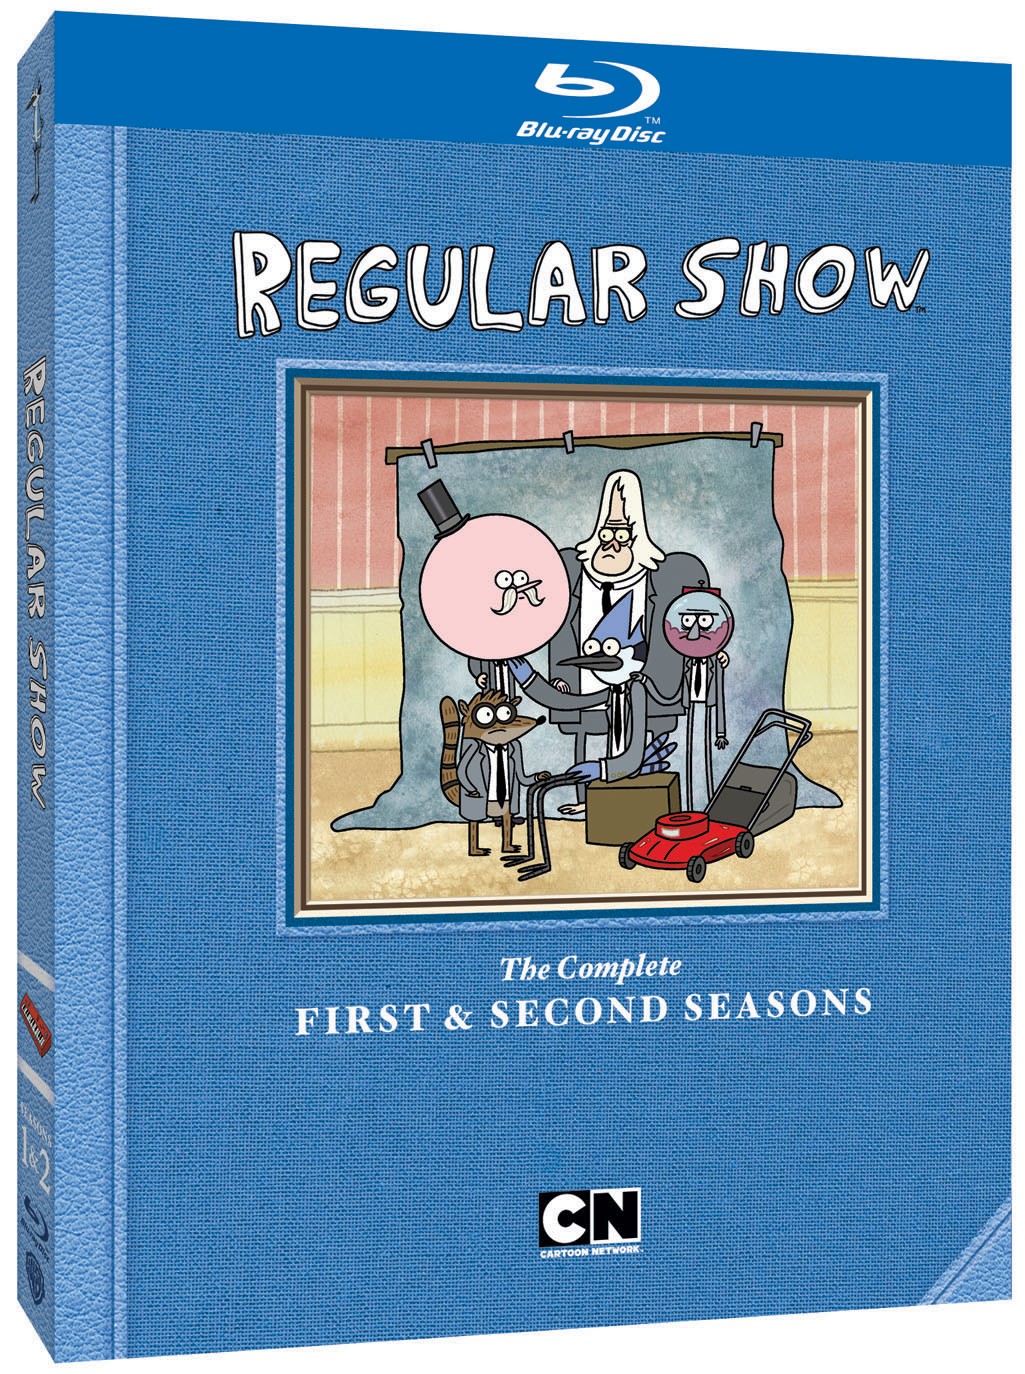 REGULAR SHOW: THE COMPLETE FIRST SEASON & SECOND SEASONS on Blu-ray and